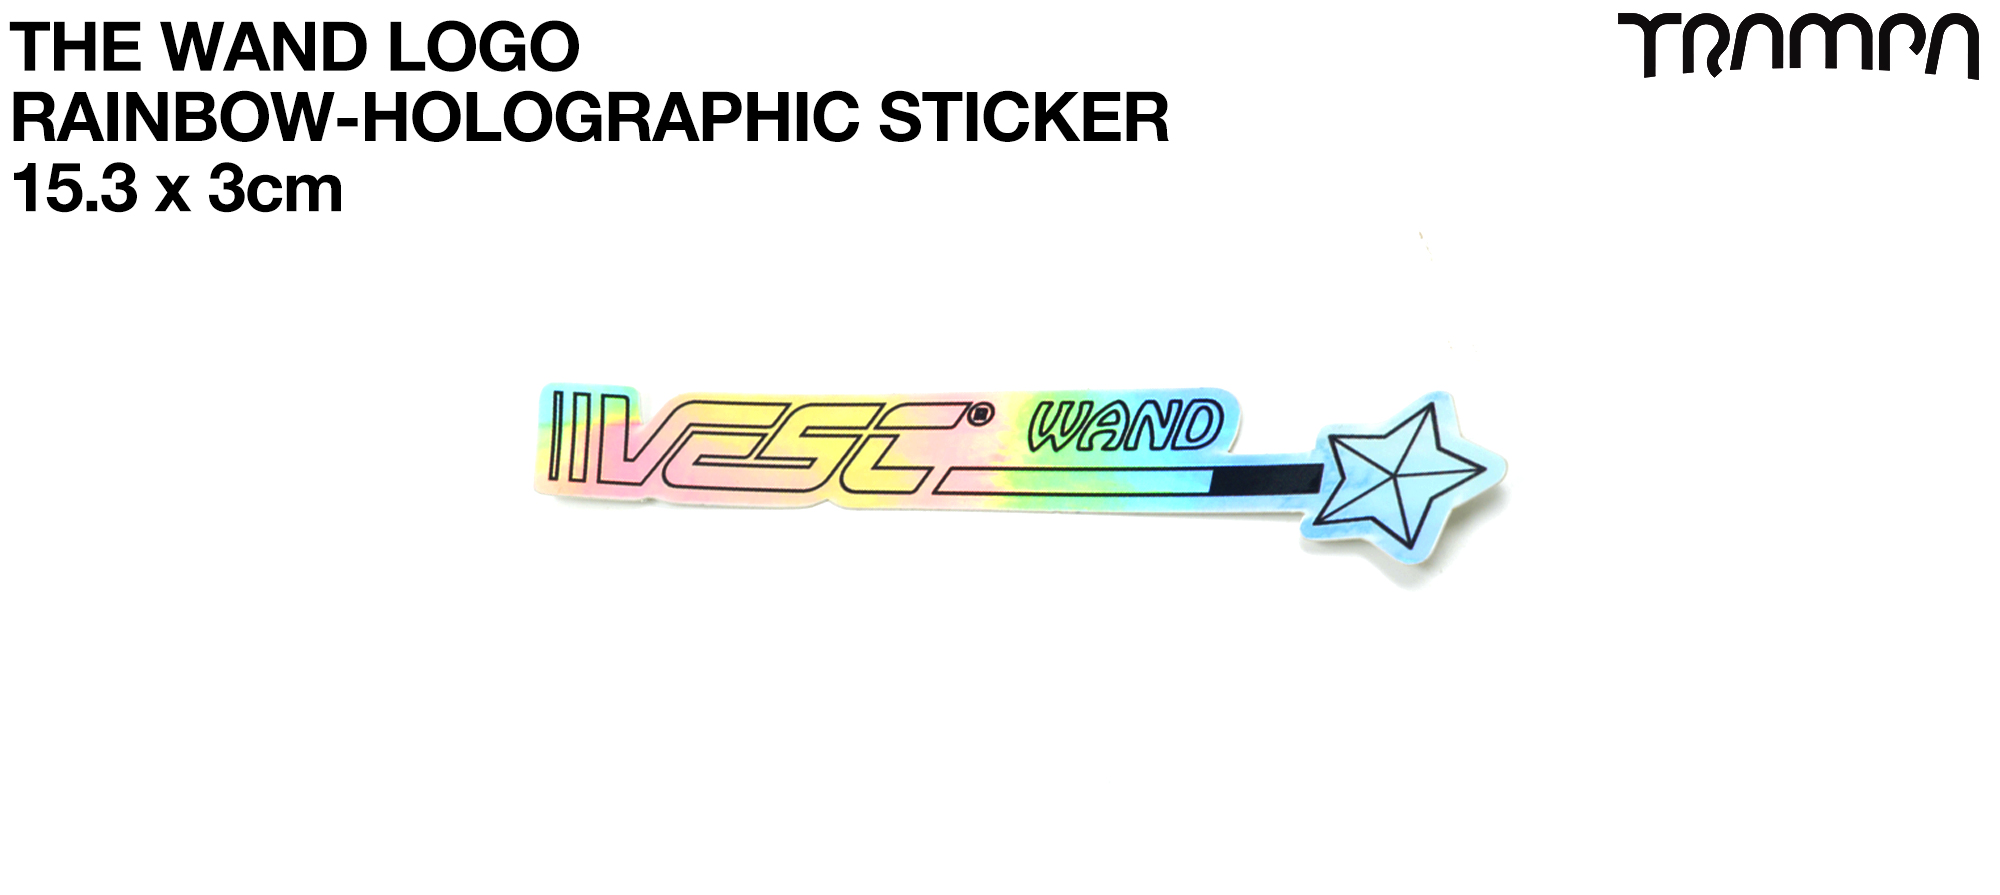 The WAND Rainbow Holographic Sticker